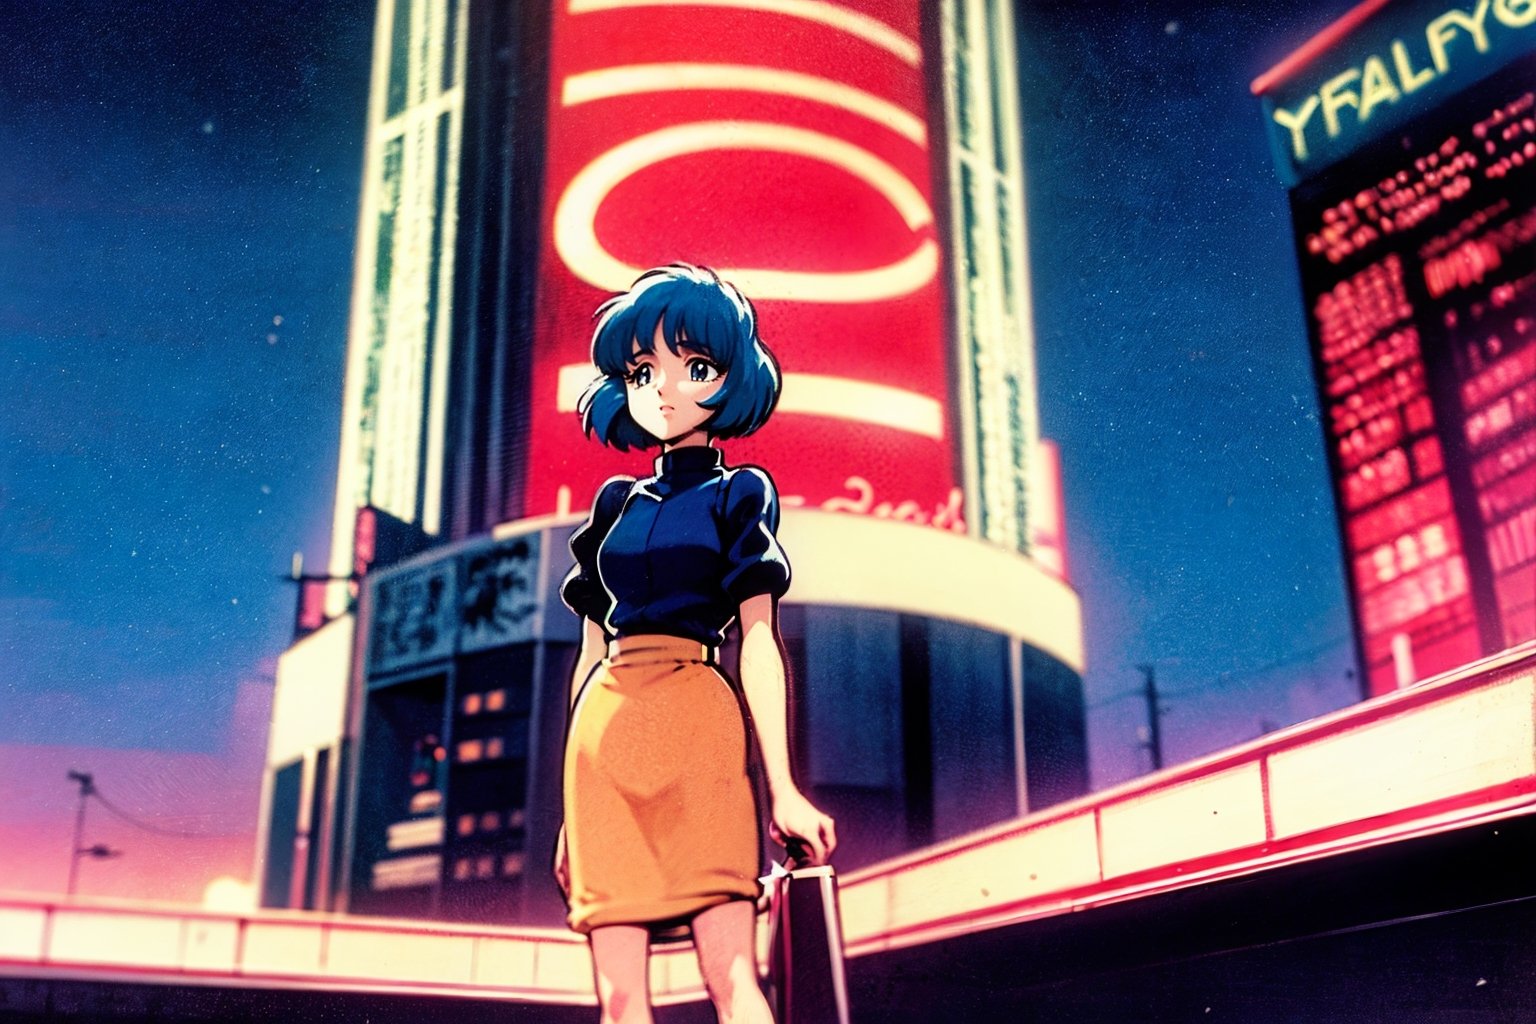 Ghibli movies, 90s, 80s anime, retro style, pastel colors, lo-fi art,
 Cyberpunk City, Neon Tube, Blue Hair, Cute Face Girl, Stand Up,
twilight city, city sign glowing, wide-angle shooting, high resolution, high quality, high definition, 4K, 8K,80s,00s,1990s (style)